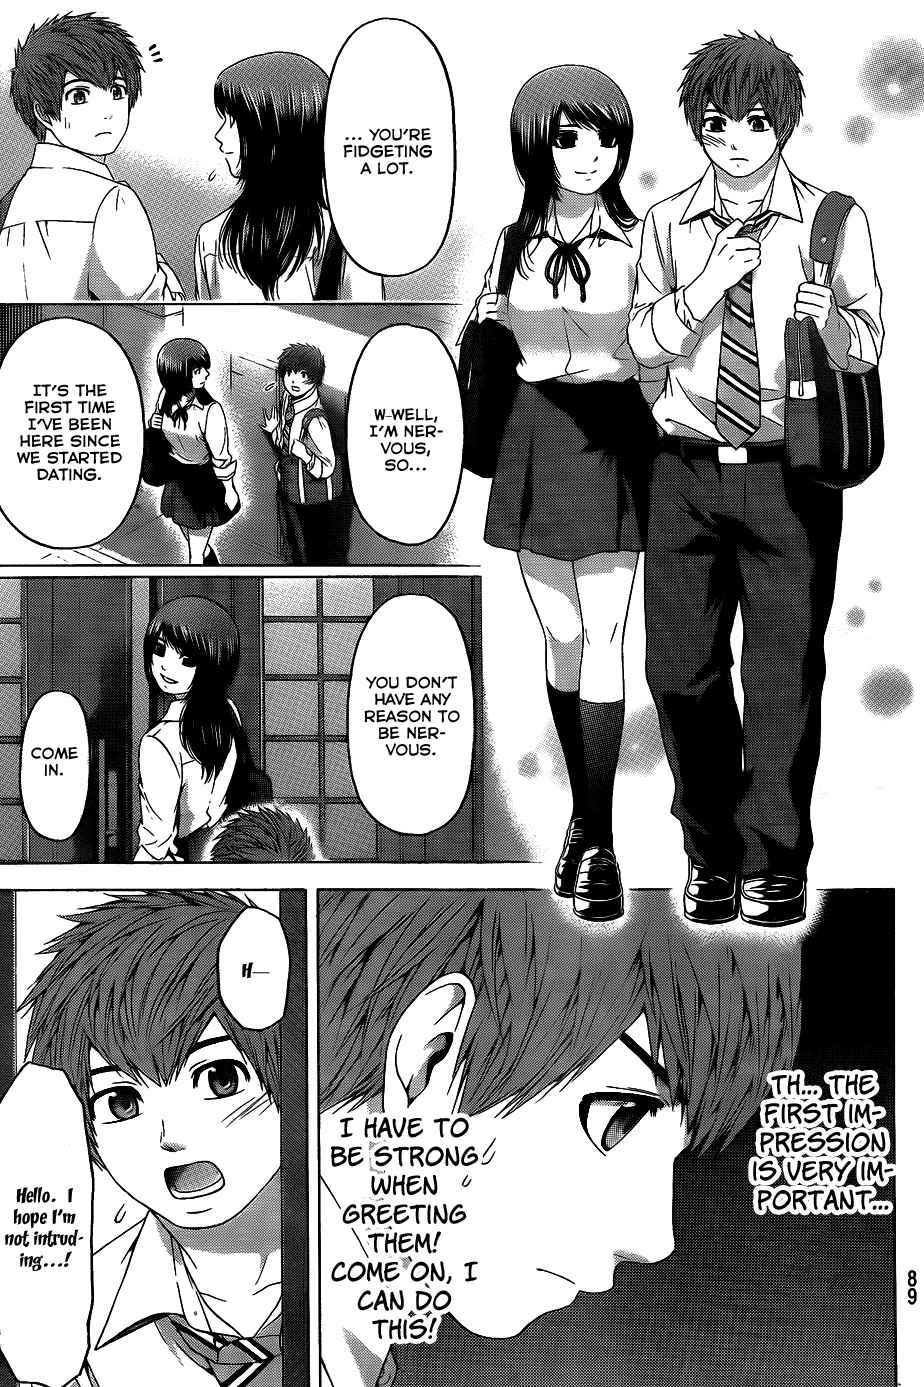 GE ~Good Ending~ Vol. 9 Ch. 81 Man and Woman